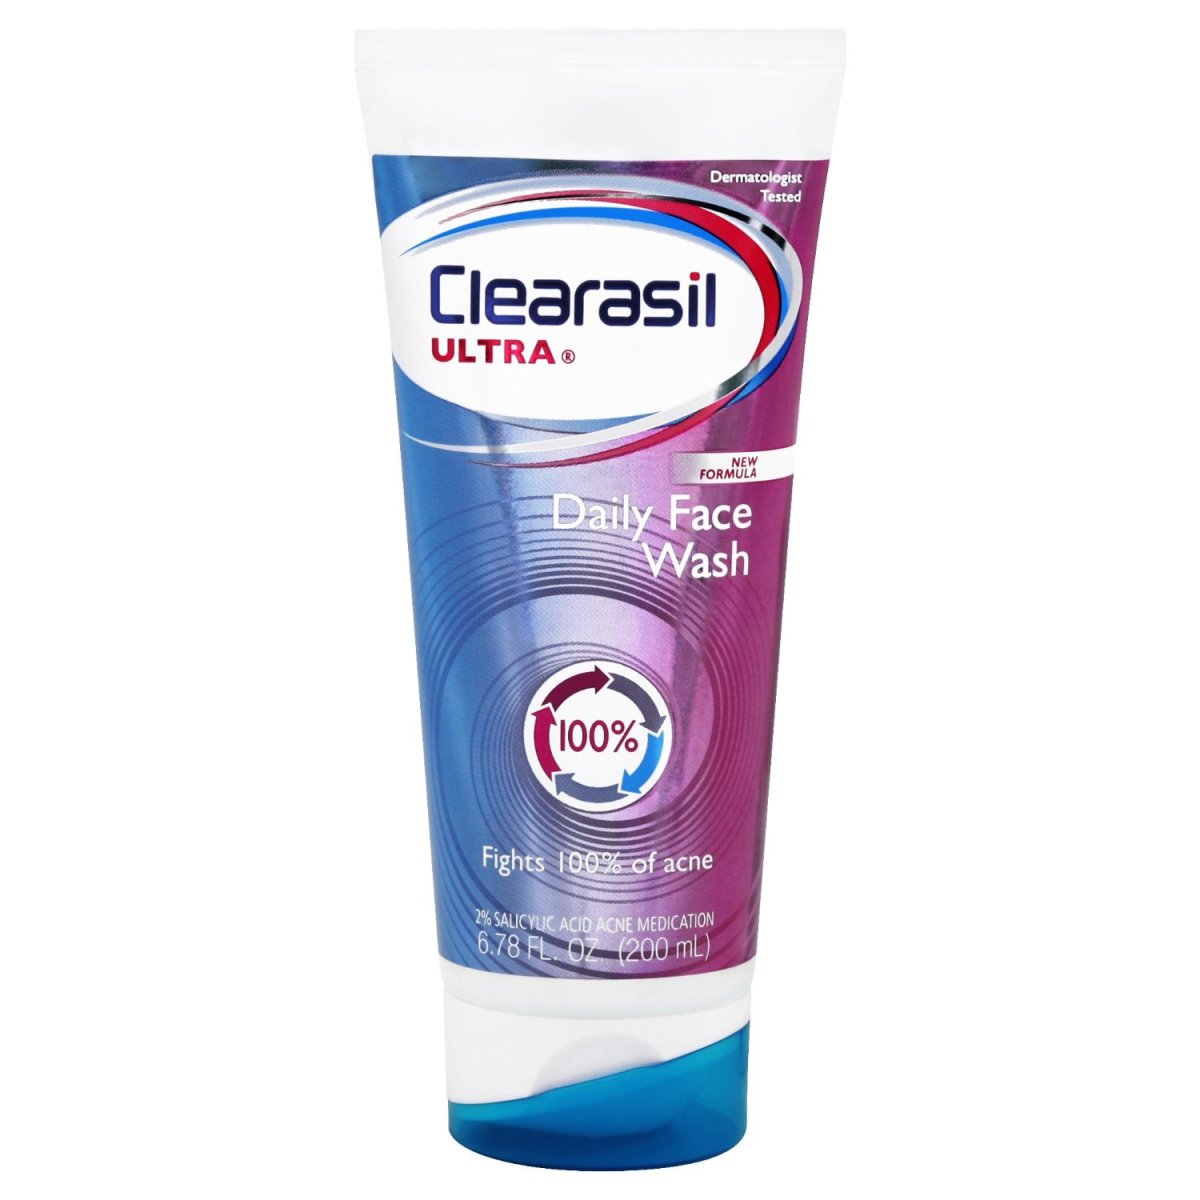 Clearasil Ultra Daily Face Wash Review